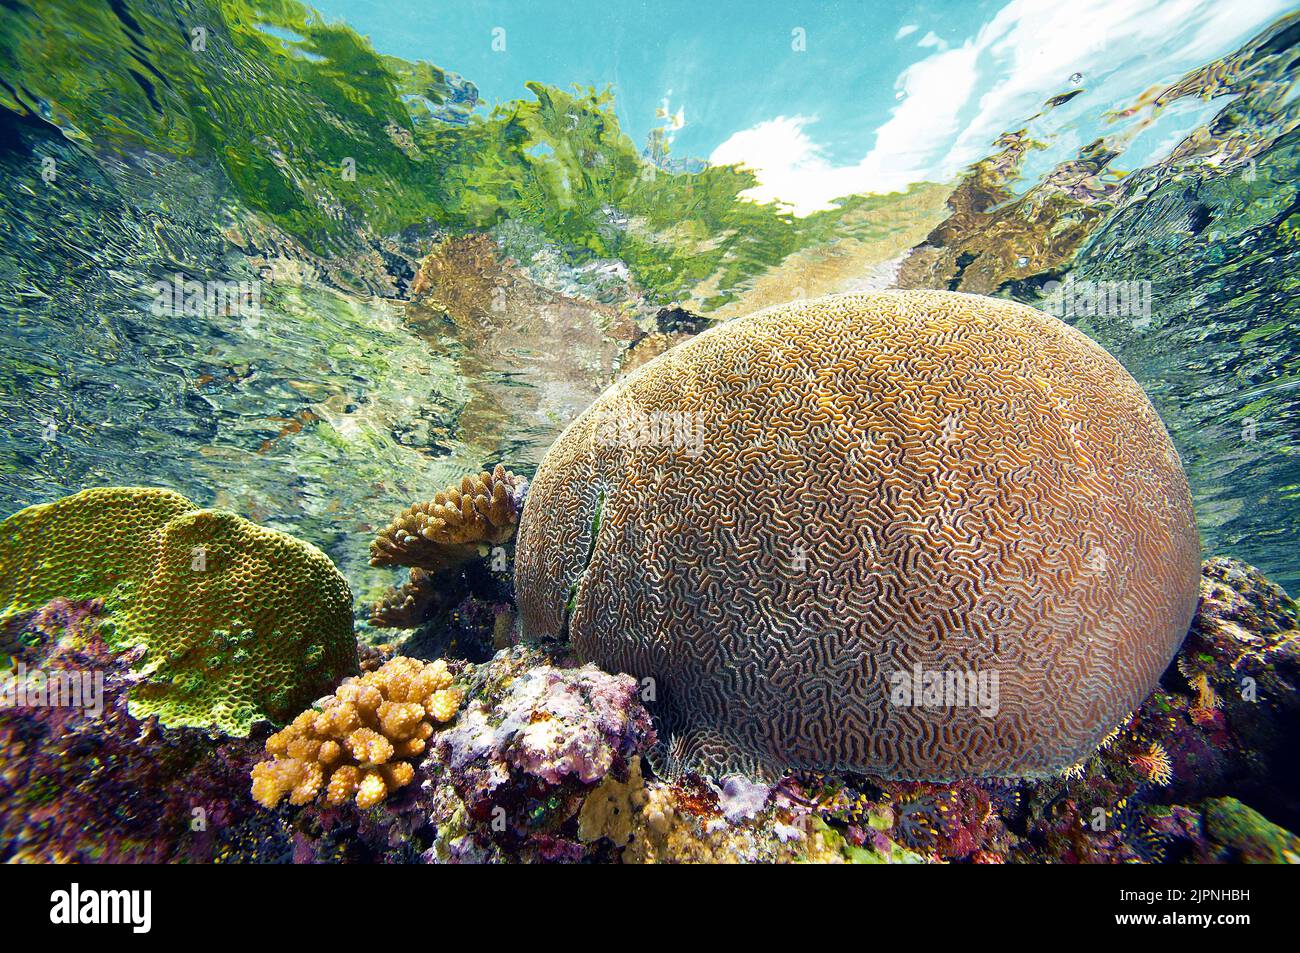 Huge brain coral (Platygyra lamellina) in a tropical coral reef, Solomon islands, Pacific ocean Stock Photo